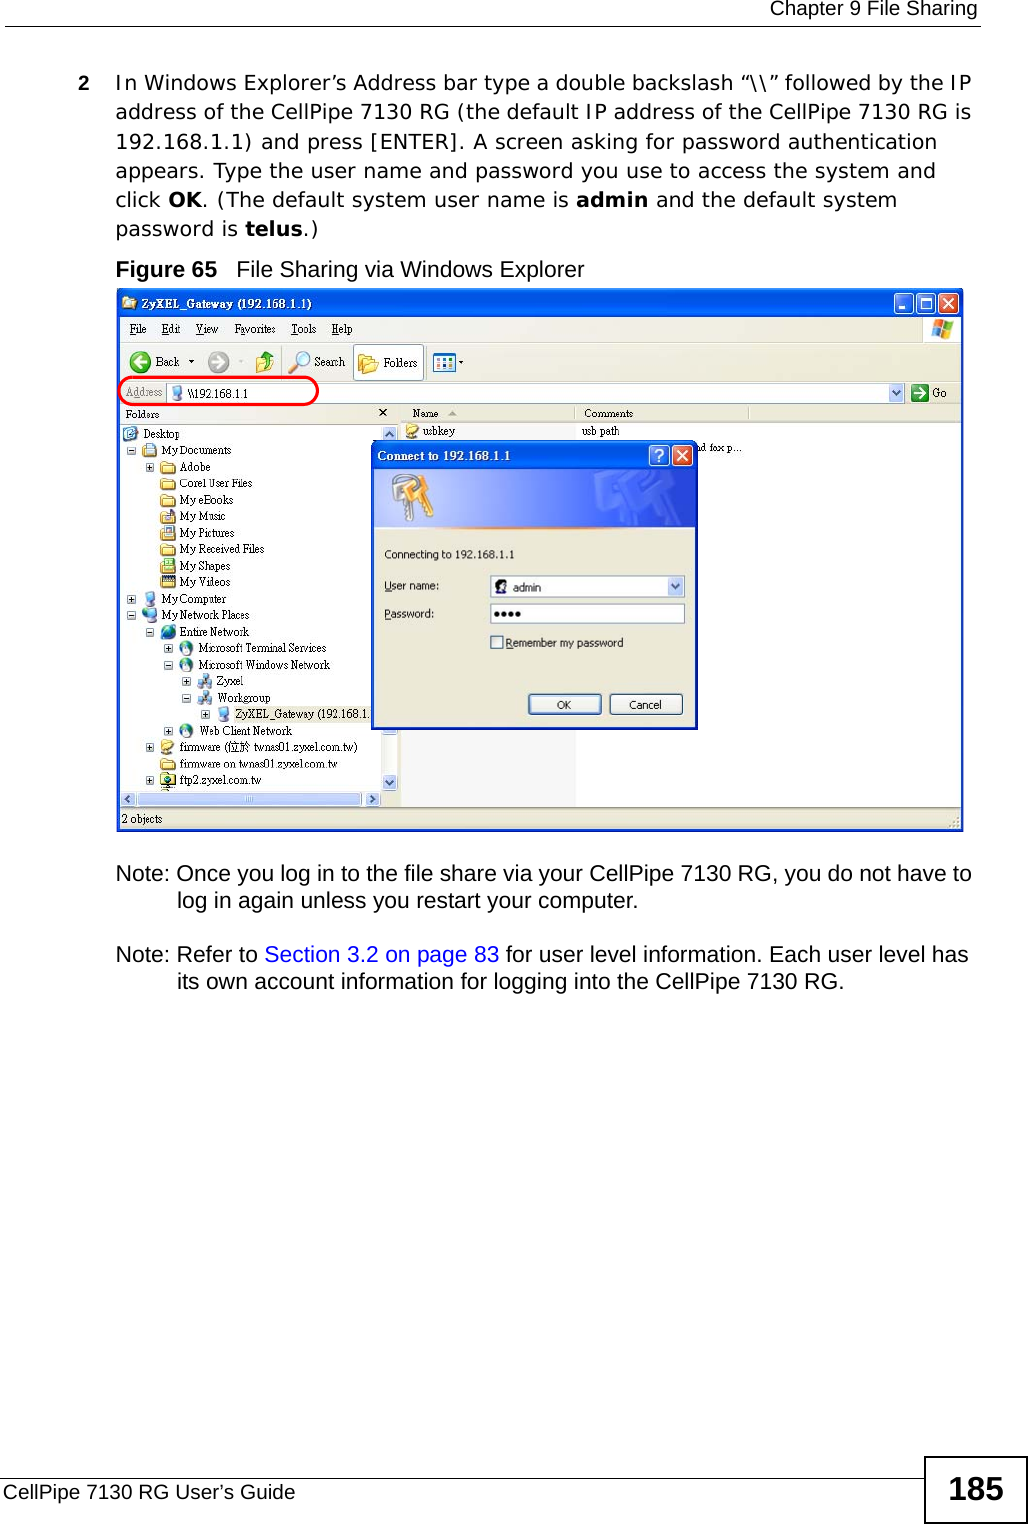  Chapter 9 File SharingCellPipe 7130 RG User’s Guide 1852In Windows Explorer’s Address bar type a double backslash “\\” followed by the IP address of the CellPipe 7130 RG (the default IP address of the CellPipe 7130 RG is 192.168.1.1) and press [ENTER]. A screen asking for password authentication appears. Type the user name and password you use to access the system and click OK. (The default system user name is admin and the default system password is telus.)Figure 65   File Sharing via Windows ExplorerNote: Once you log in to the file share via your CellPipe 7130 RG, you do not have to log in again unless you restart your computer. Note: Refer to Section 3.2 on page 83 for user level information. Each user level has its own account information for logging into the CellPipe 7130 RG.